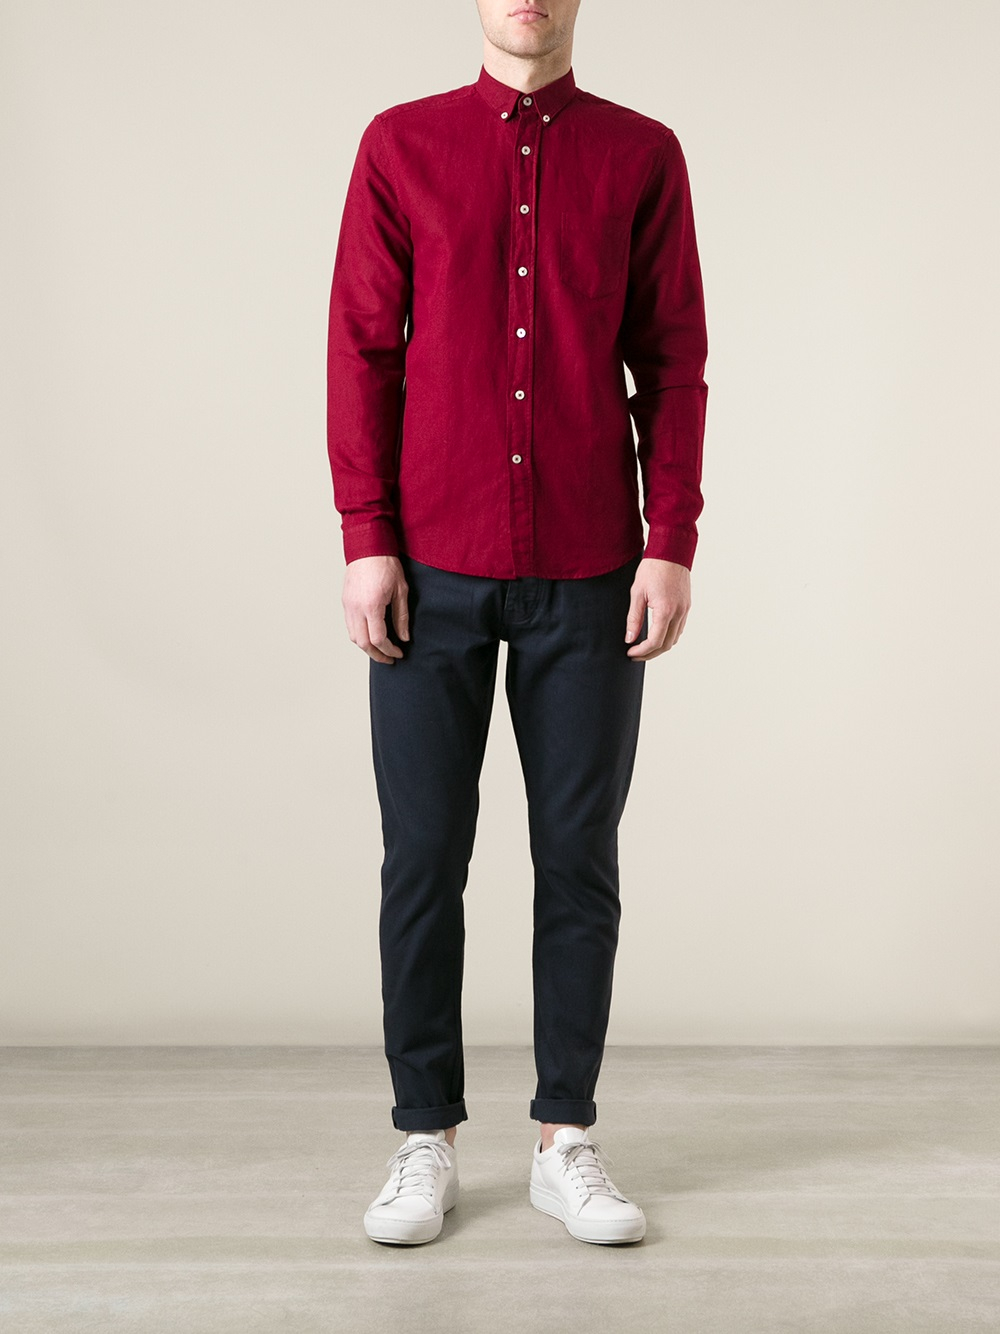 Lyst - Ami Button Down Shirt in Red for Men